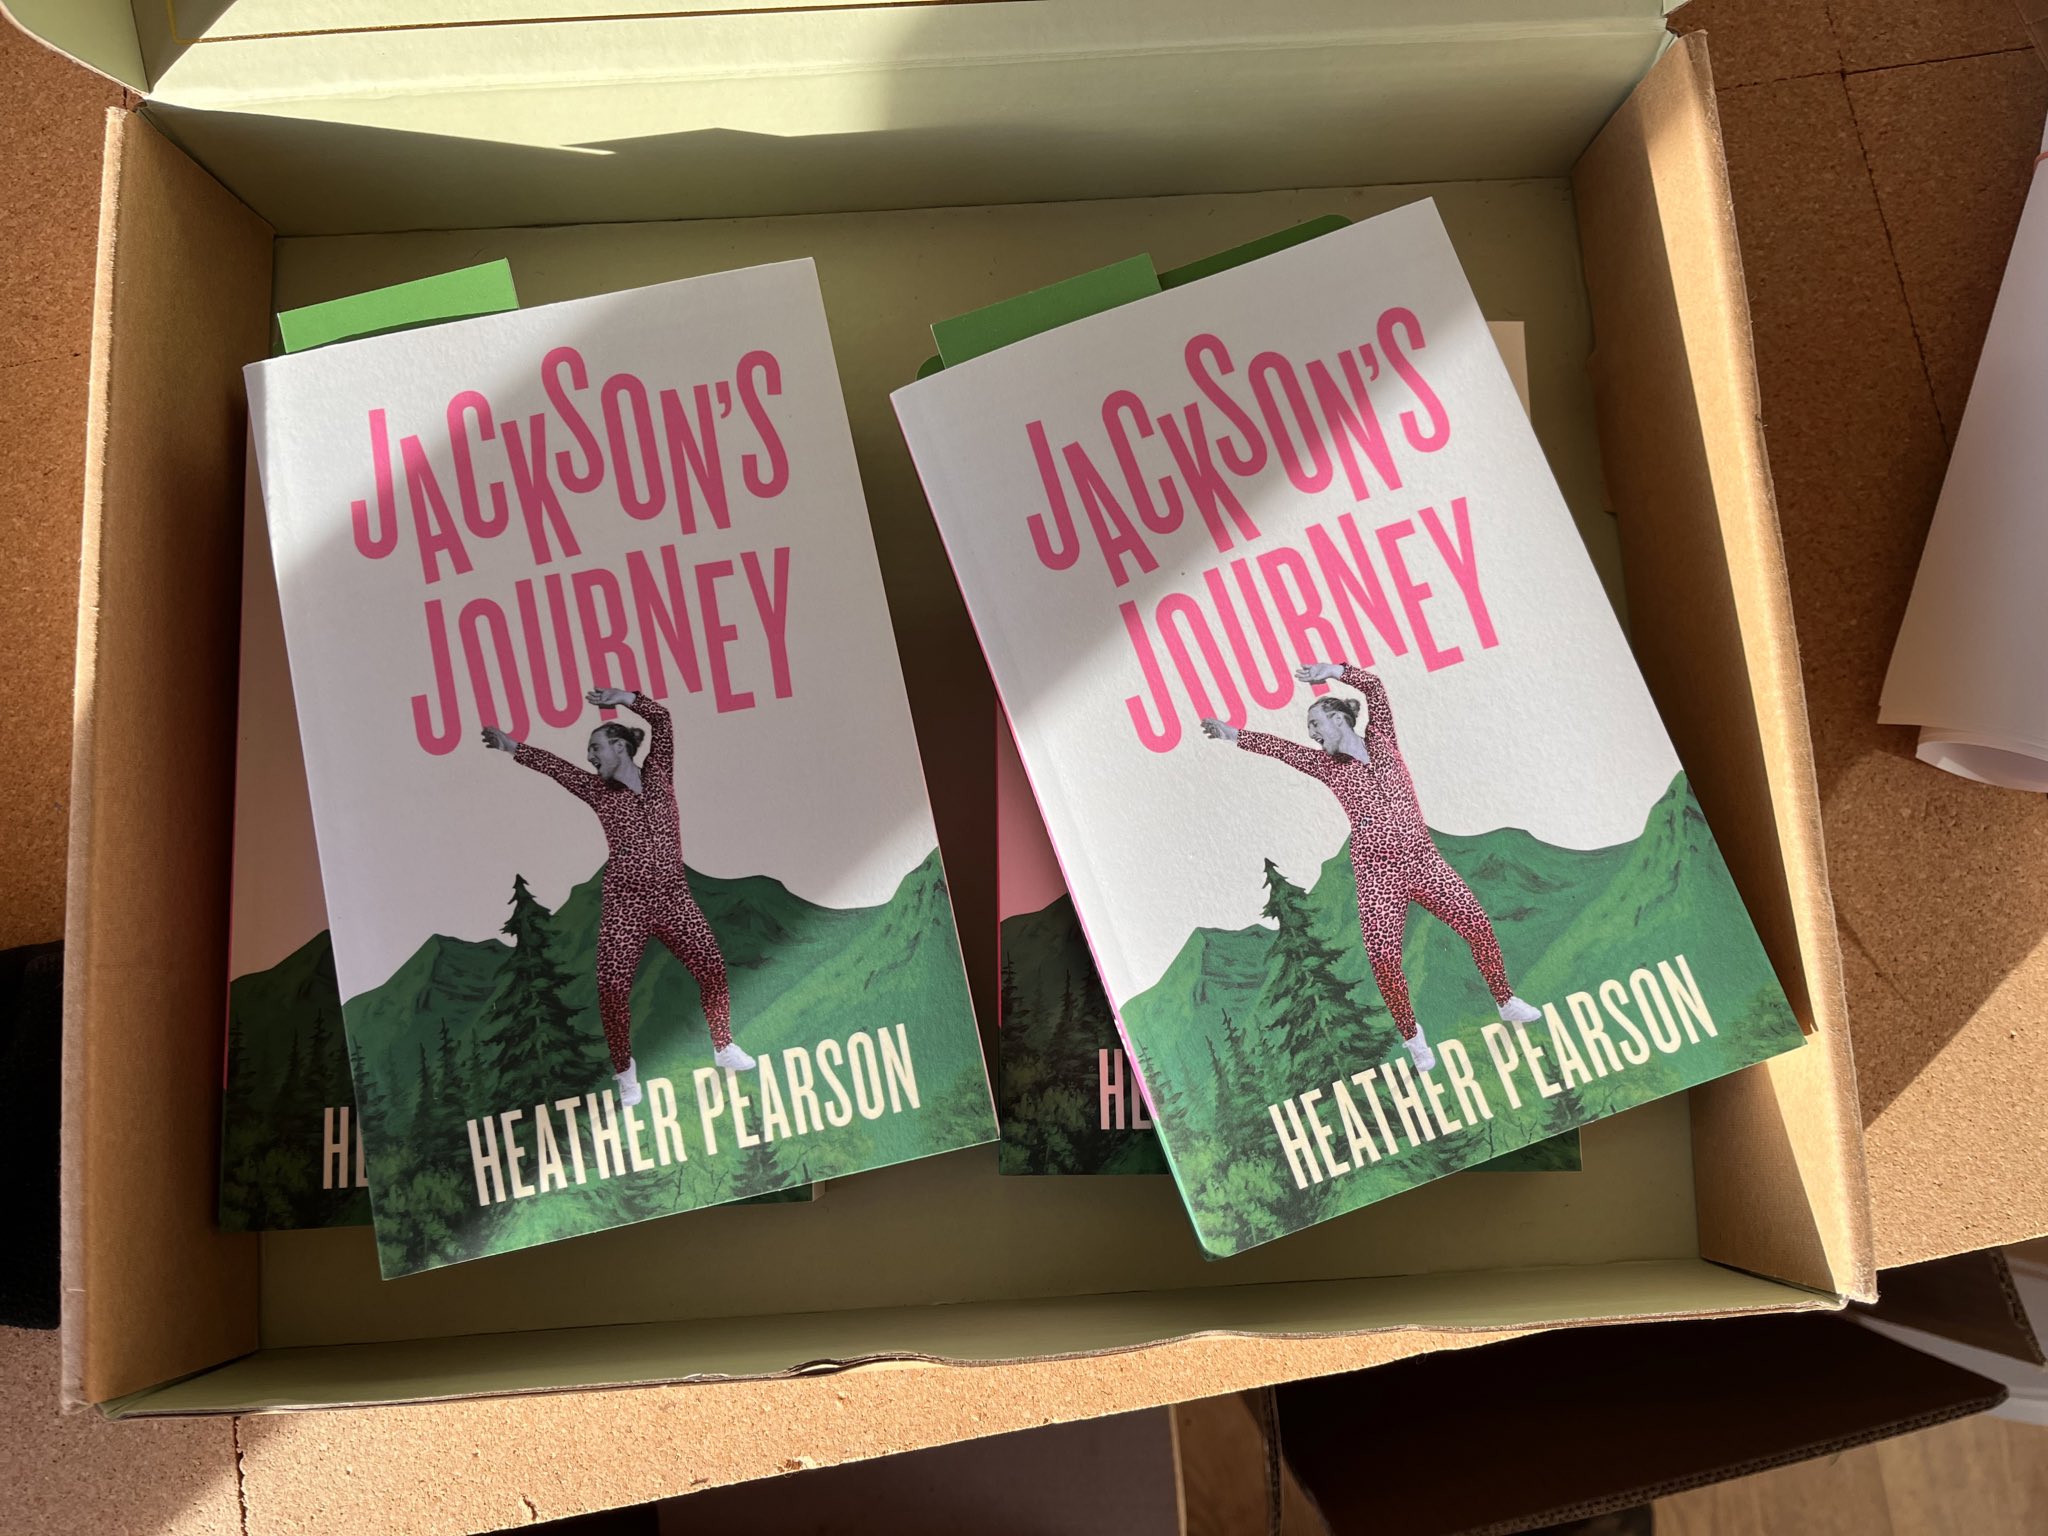 Jackson's Journey what is it all about 